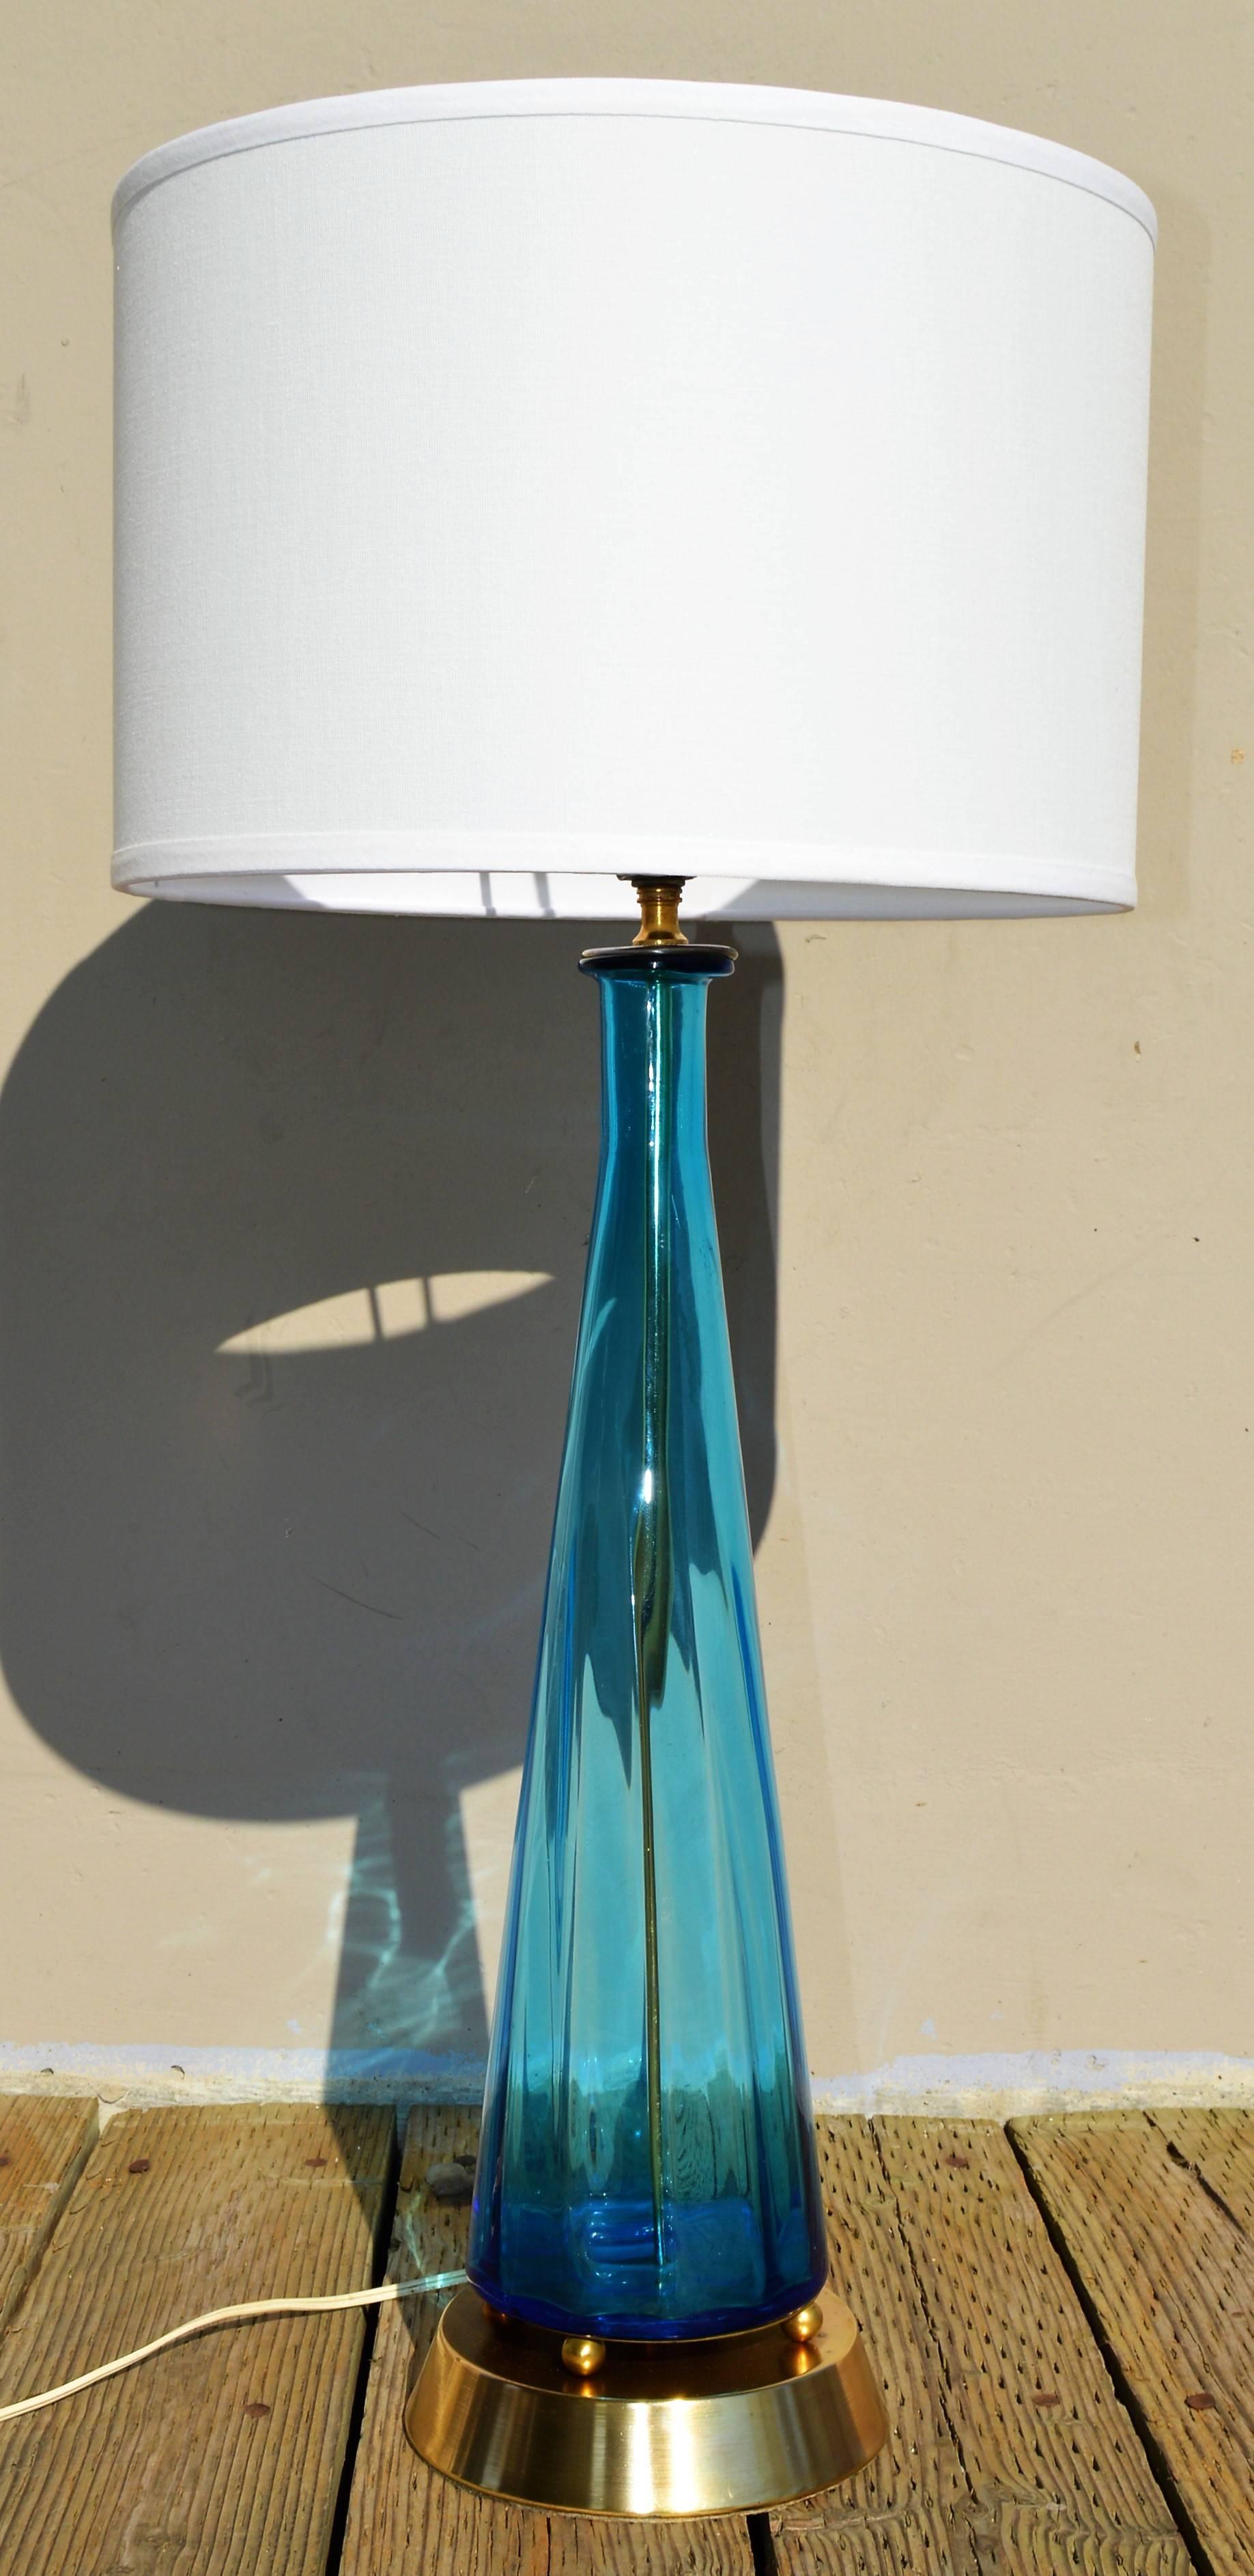 This stunning 1950s Murano Italian glass lamp is the most delicious shade of blue. The glass floats atop four brass balls on a flared brass base. Not original, but a perfect pairing with the brass claw foot blue glass finial. Featuring a new crisp